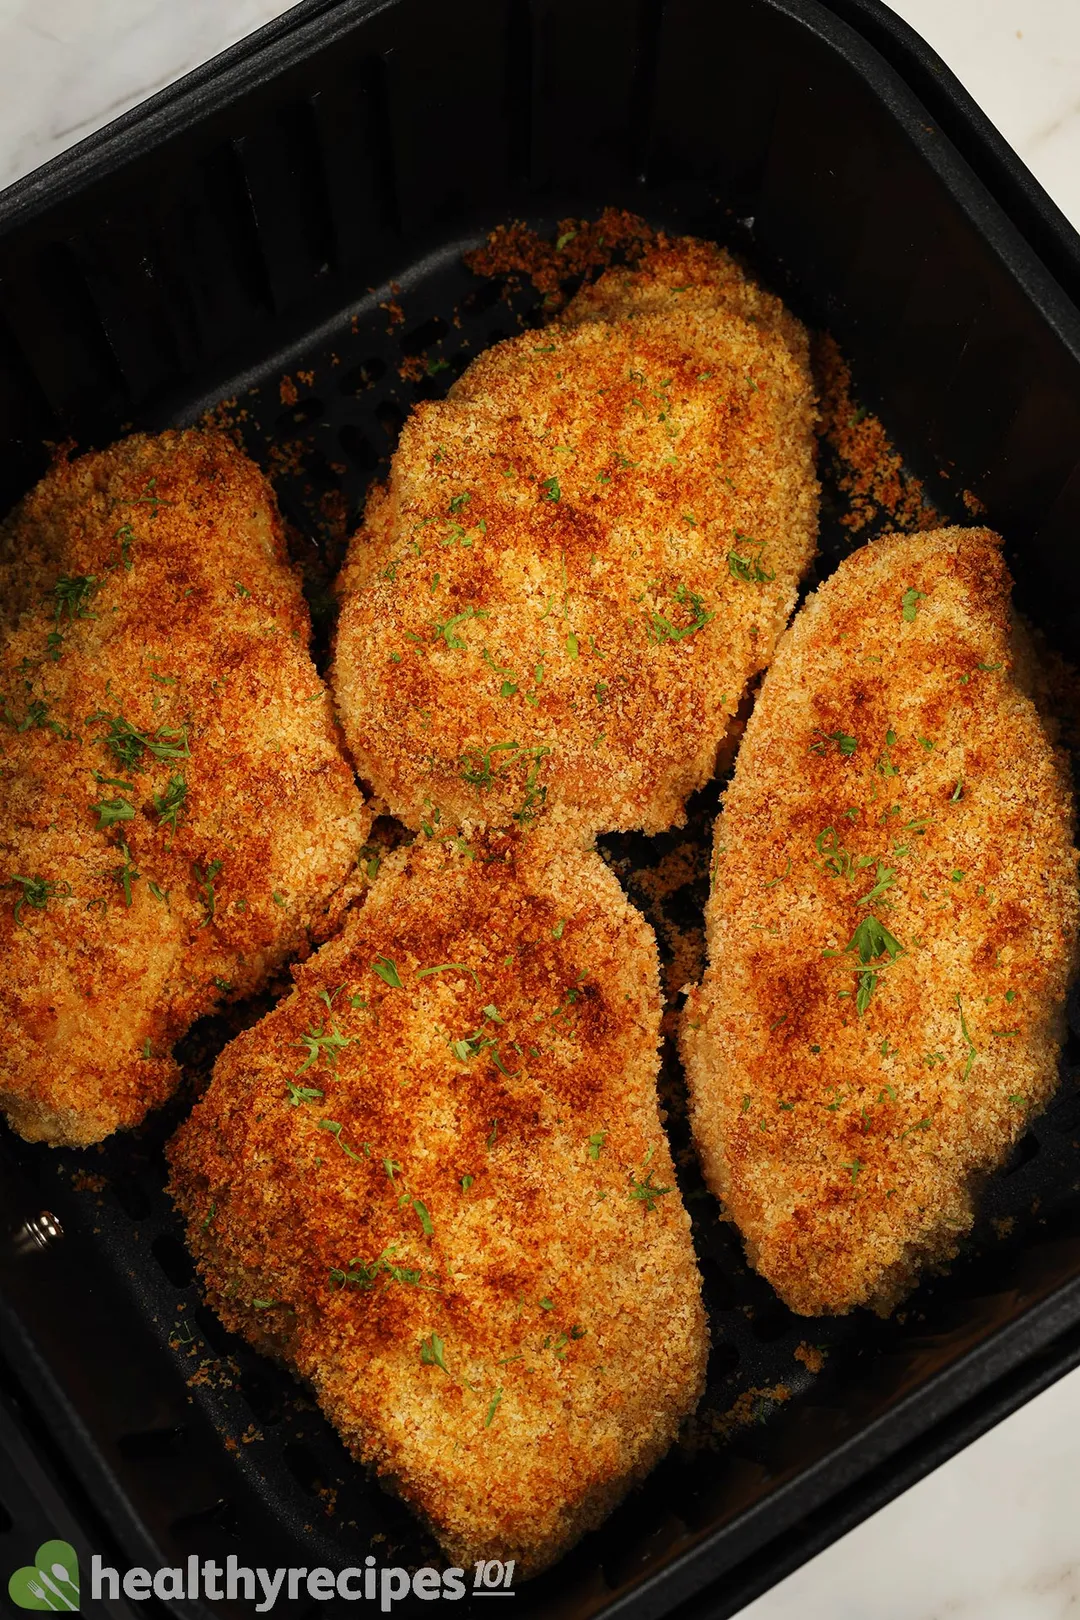 four cooked chicken breasts in an air fryer basket